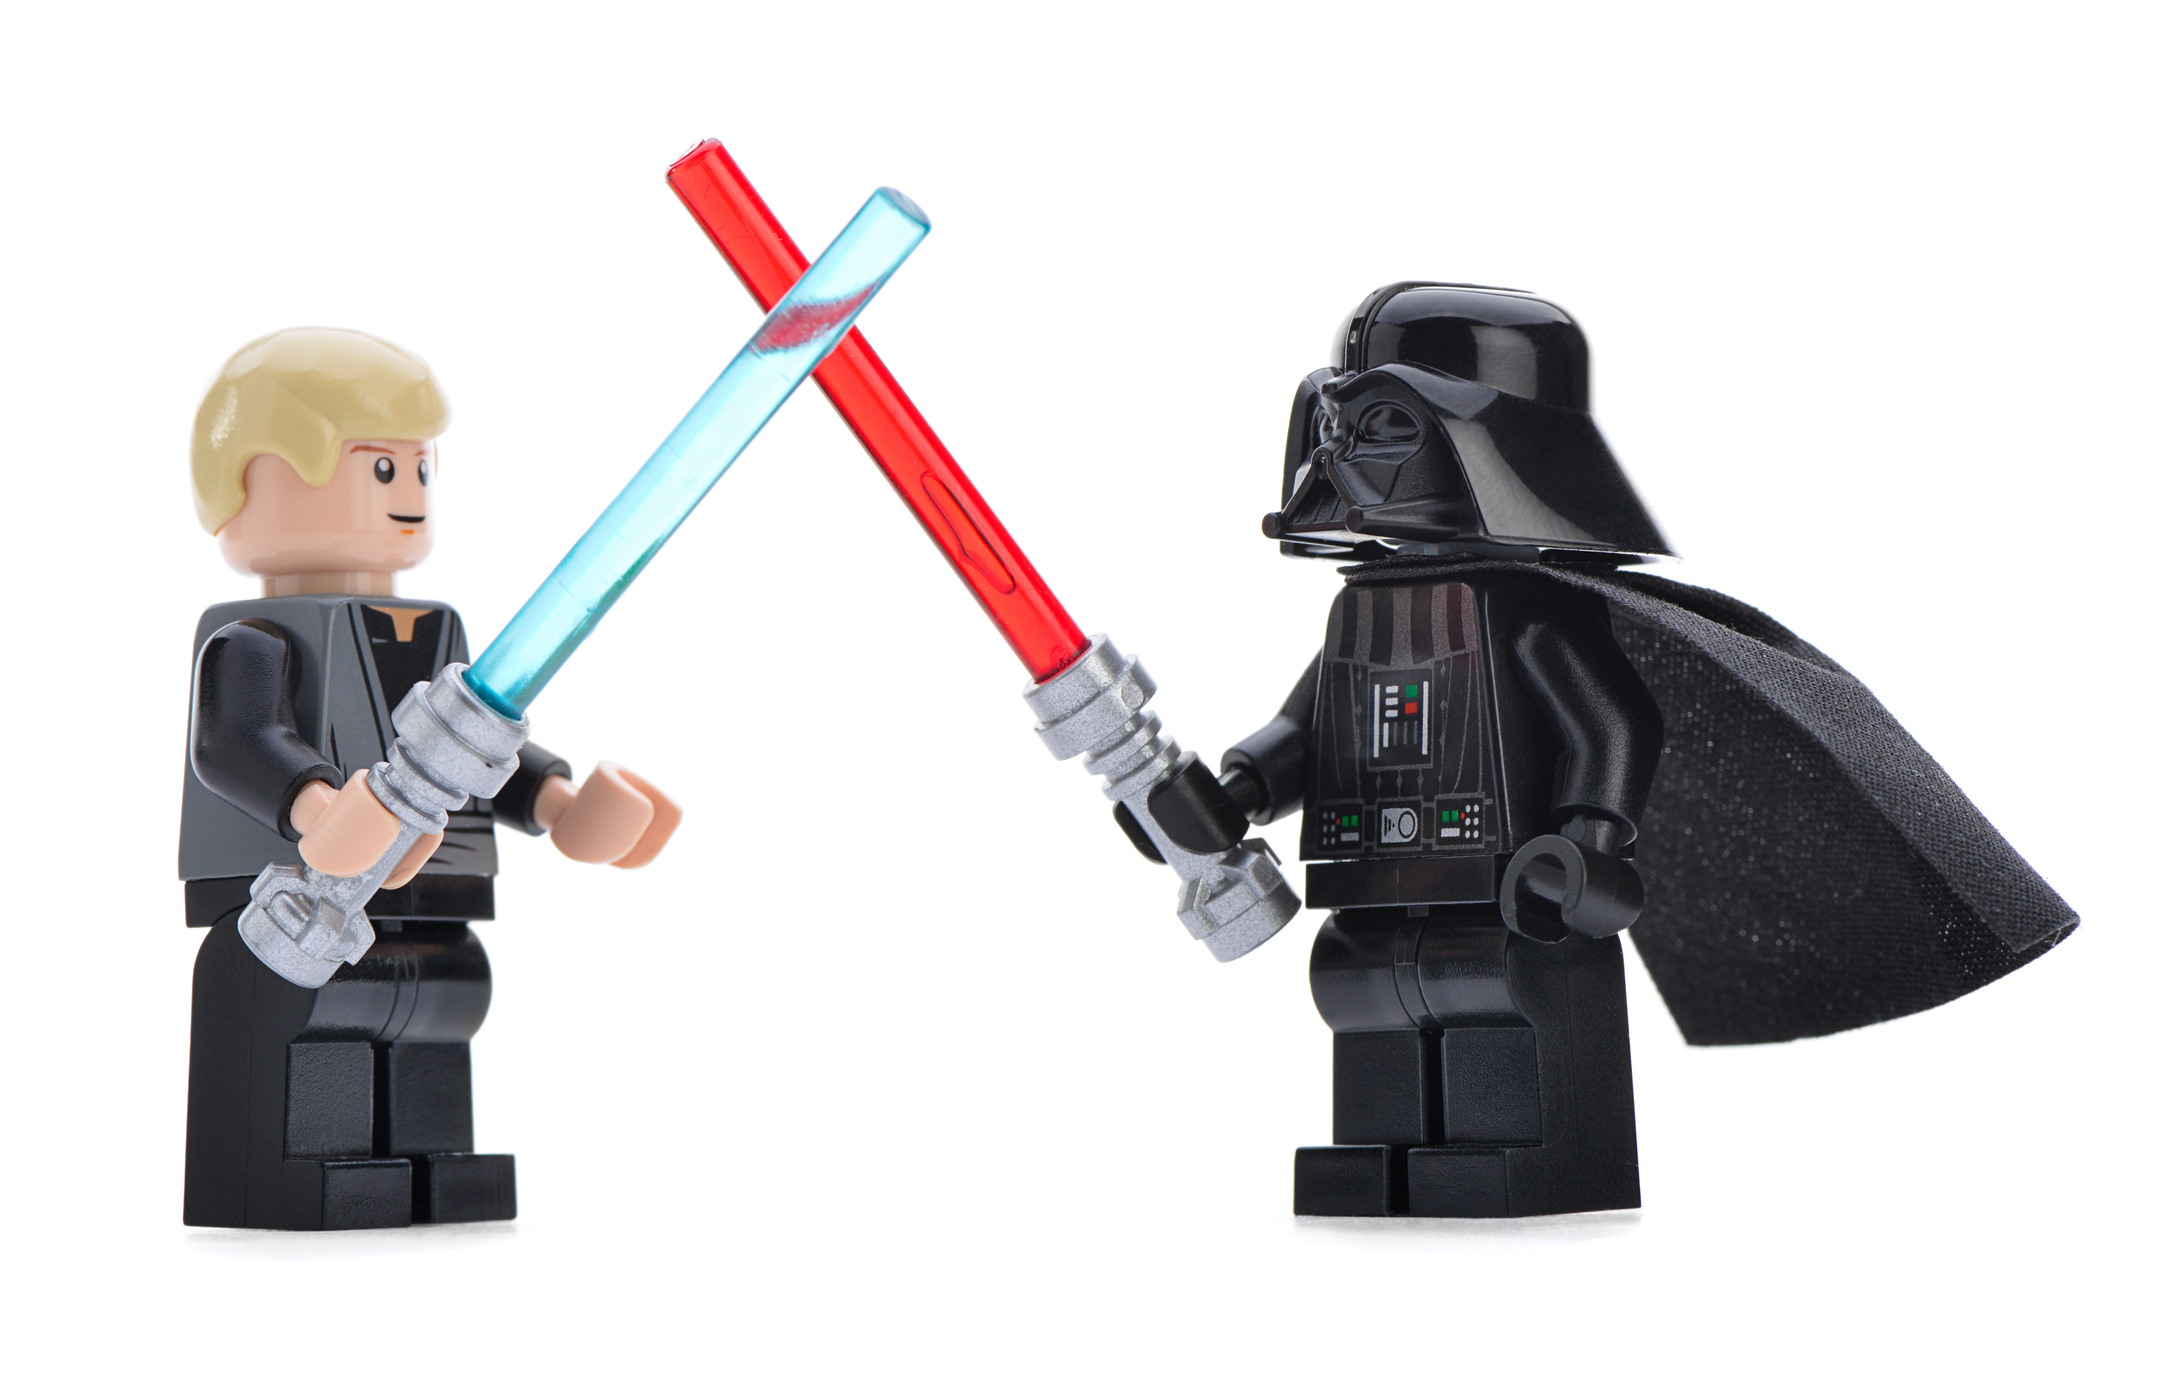 An iStock image of a lego Luke Skywalker and Darthvader fighting with lego lightsabers.